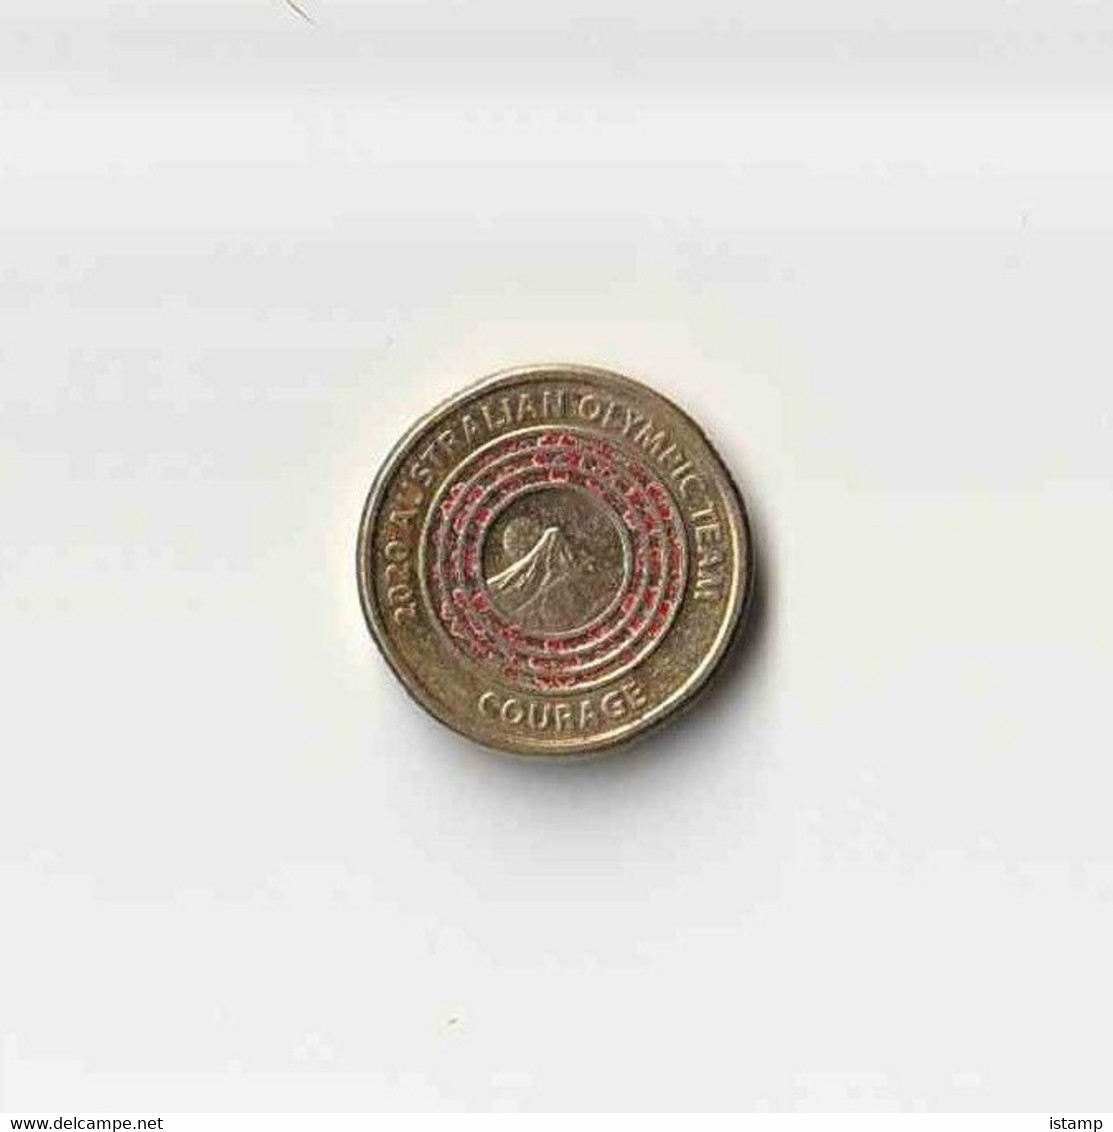 ⭐2020 - Australia Tokyo OLYMPIC GAMES 'Courage' - $2 Coin Circulated⭐ - 2 Dollars